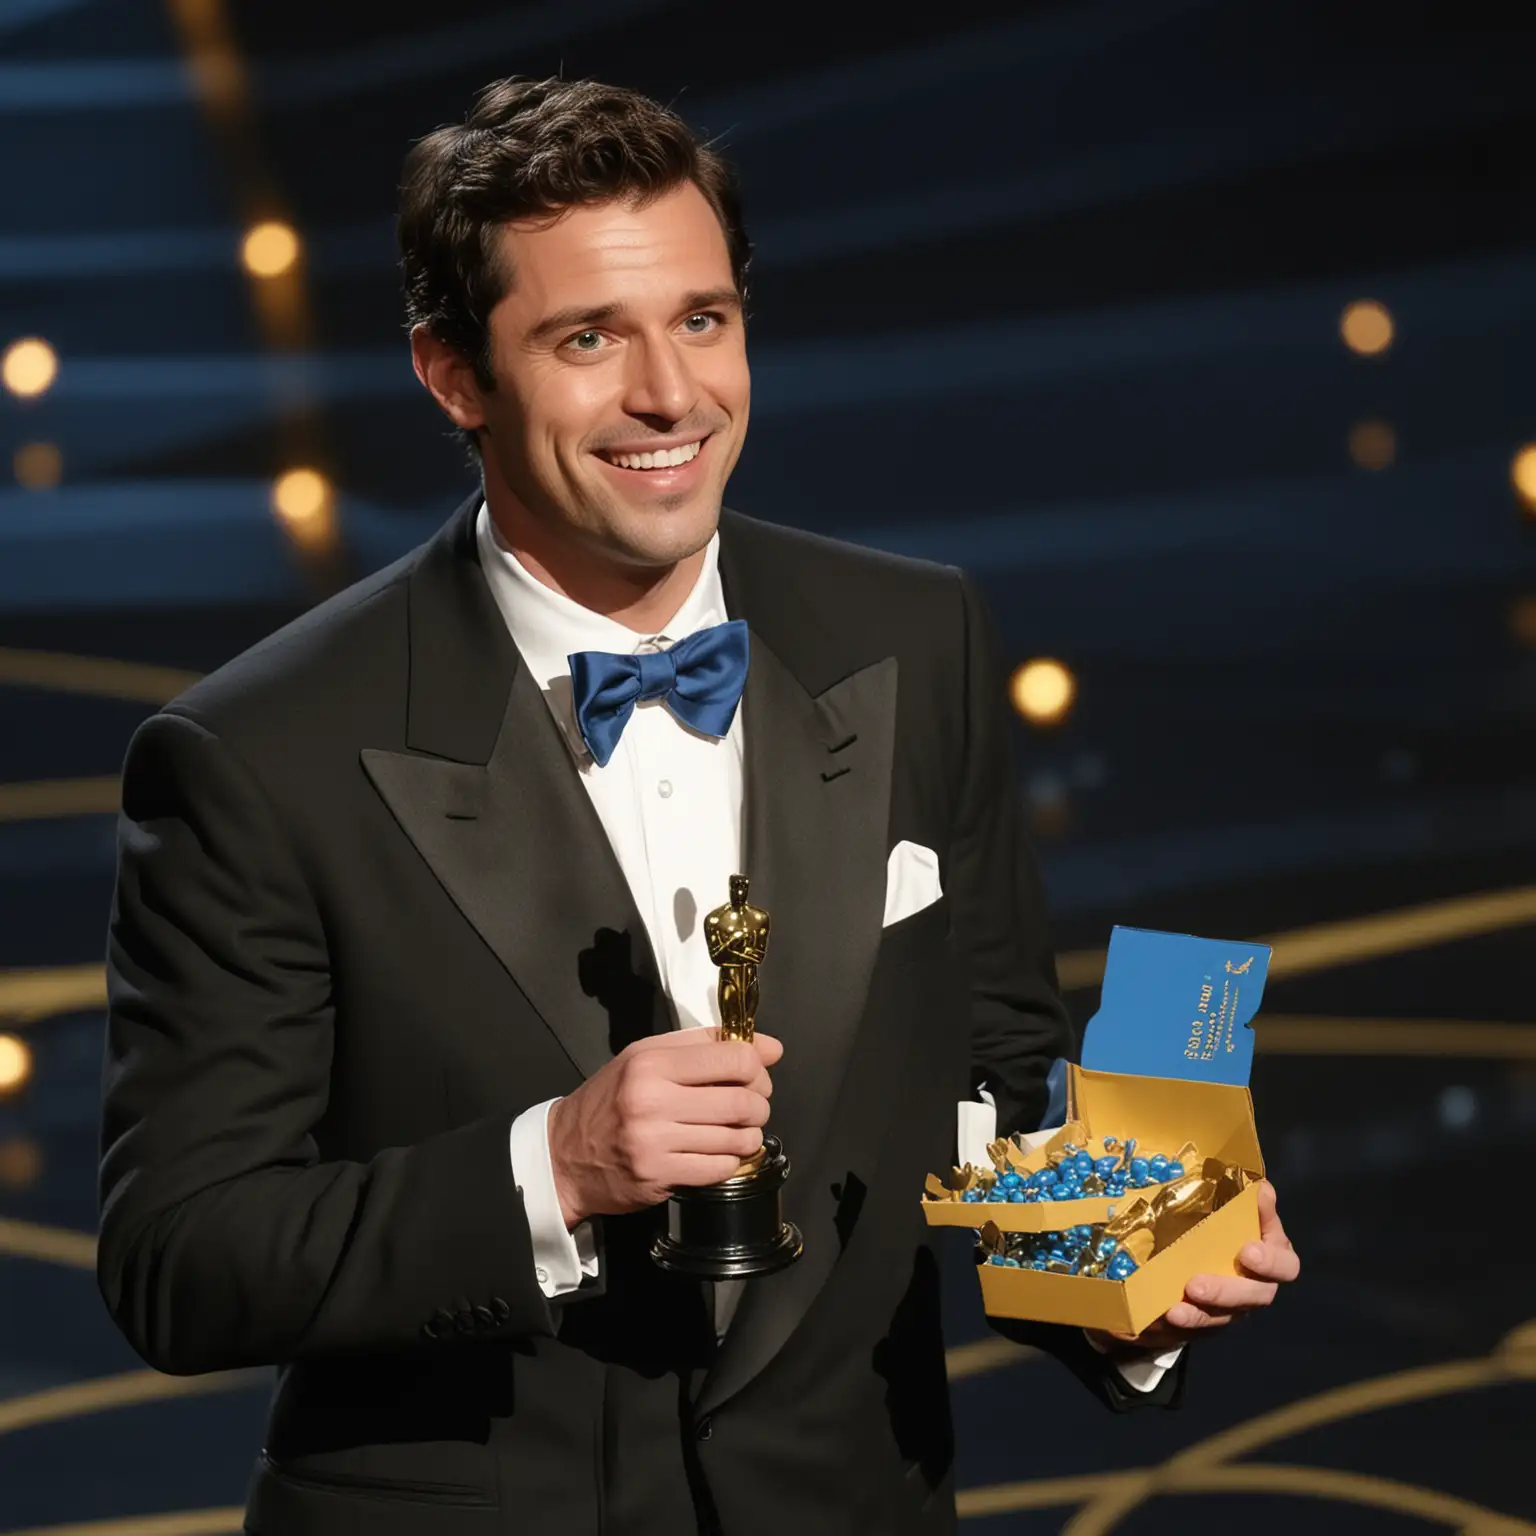 The humorous scene is depicted by a man standing on stage during the humorous Oscar ceremony.  He holds an Oscar statuette in one hand and a box of small blue pills in the other.  His facial expression suggests a mixture of surprise and pride, indicating that this may be an extremely strange category to conquer.  Solemn  atmosphere.